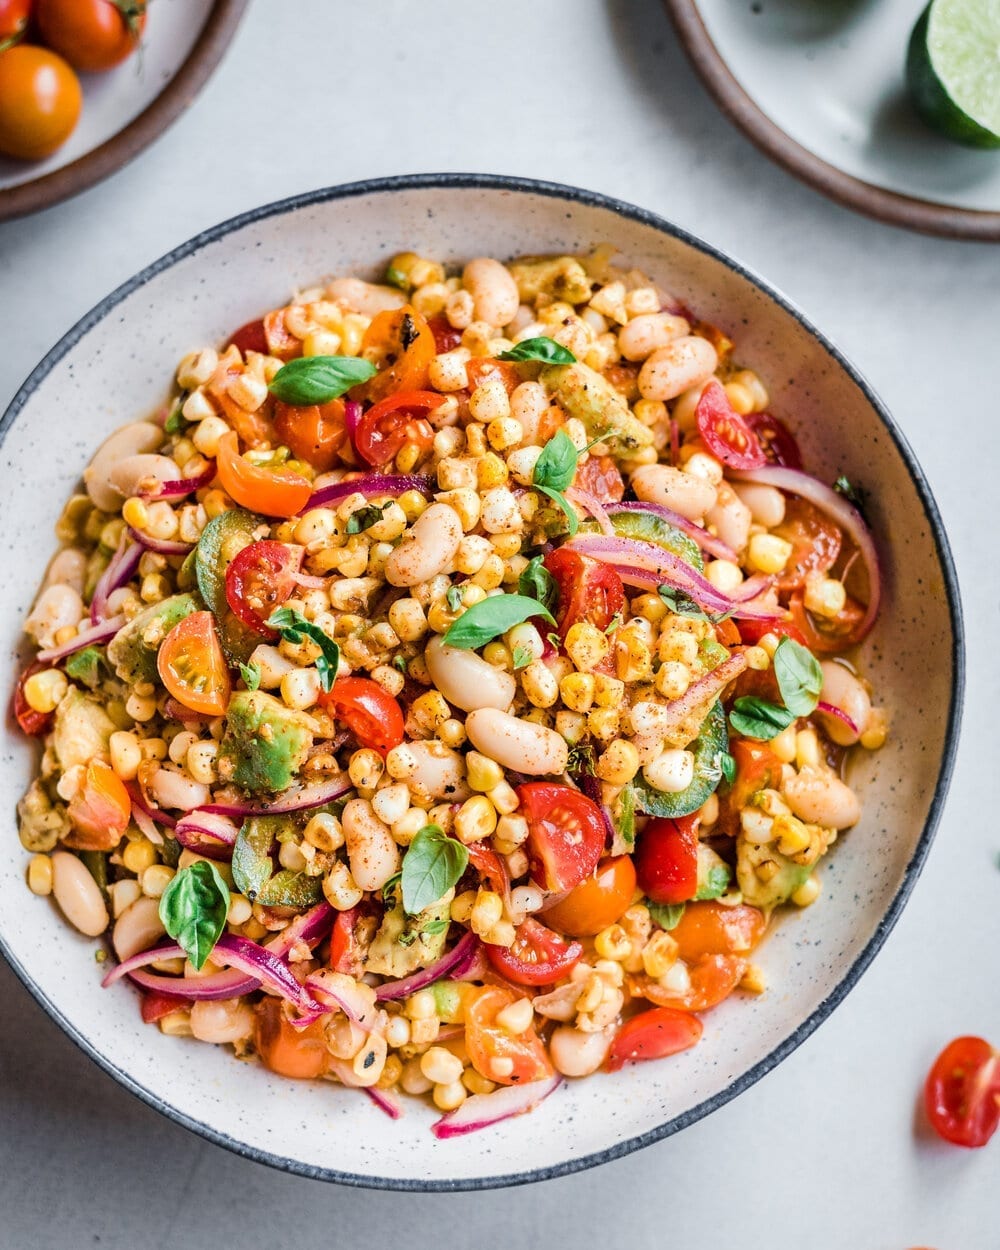 Charred corn salad with white beans in a bowl on a table.